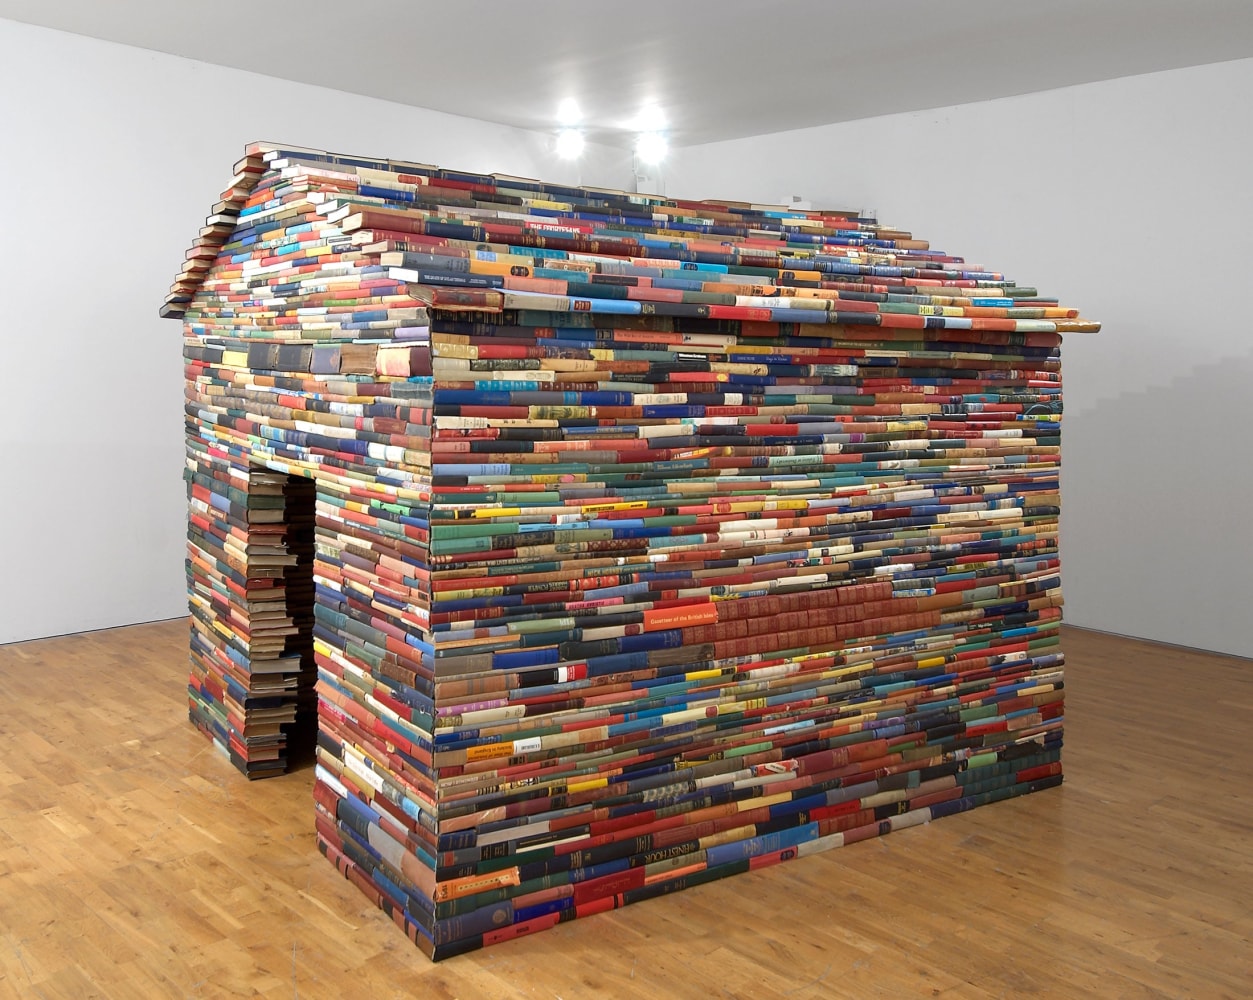 Janet Cardiff and George Bures Miller
The House of Books Has No Windows, 2008
Installation with approximately&amp;nbsp;5,000 second hand books, without sound
78 3/4 x 69 x 43 1/3 inches
(200 x 175 x 110 cm)
Commissioned by Modern Art Oxford and The Fruitmarket Gallery, Edinburgh and supported by Outset Contemporary Art Fund
Photograph: Andy Keate